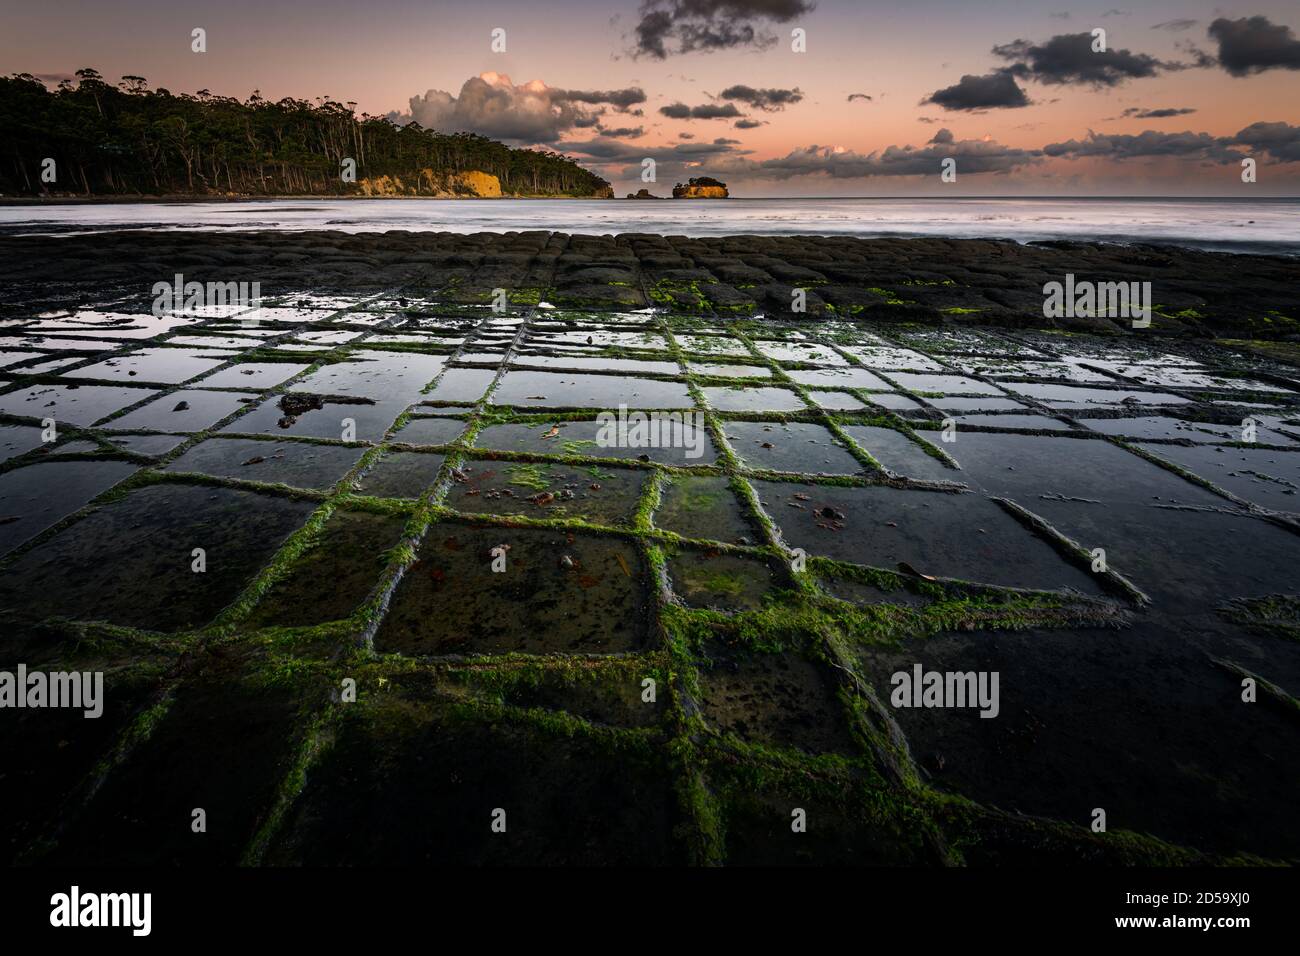 Evening reflection on the fascinating Tessellated Pavement. Stock Photo